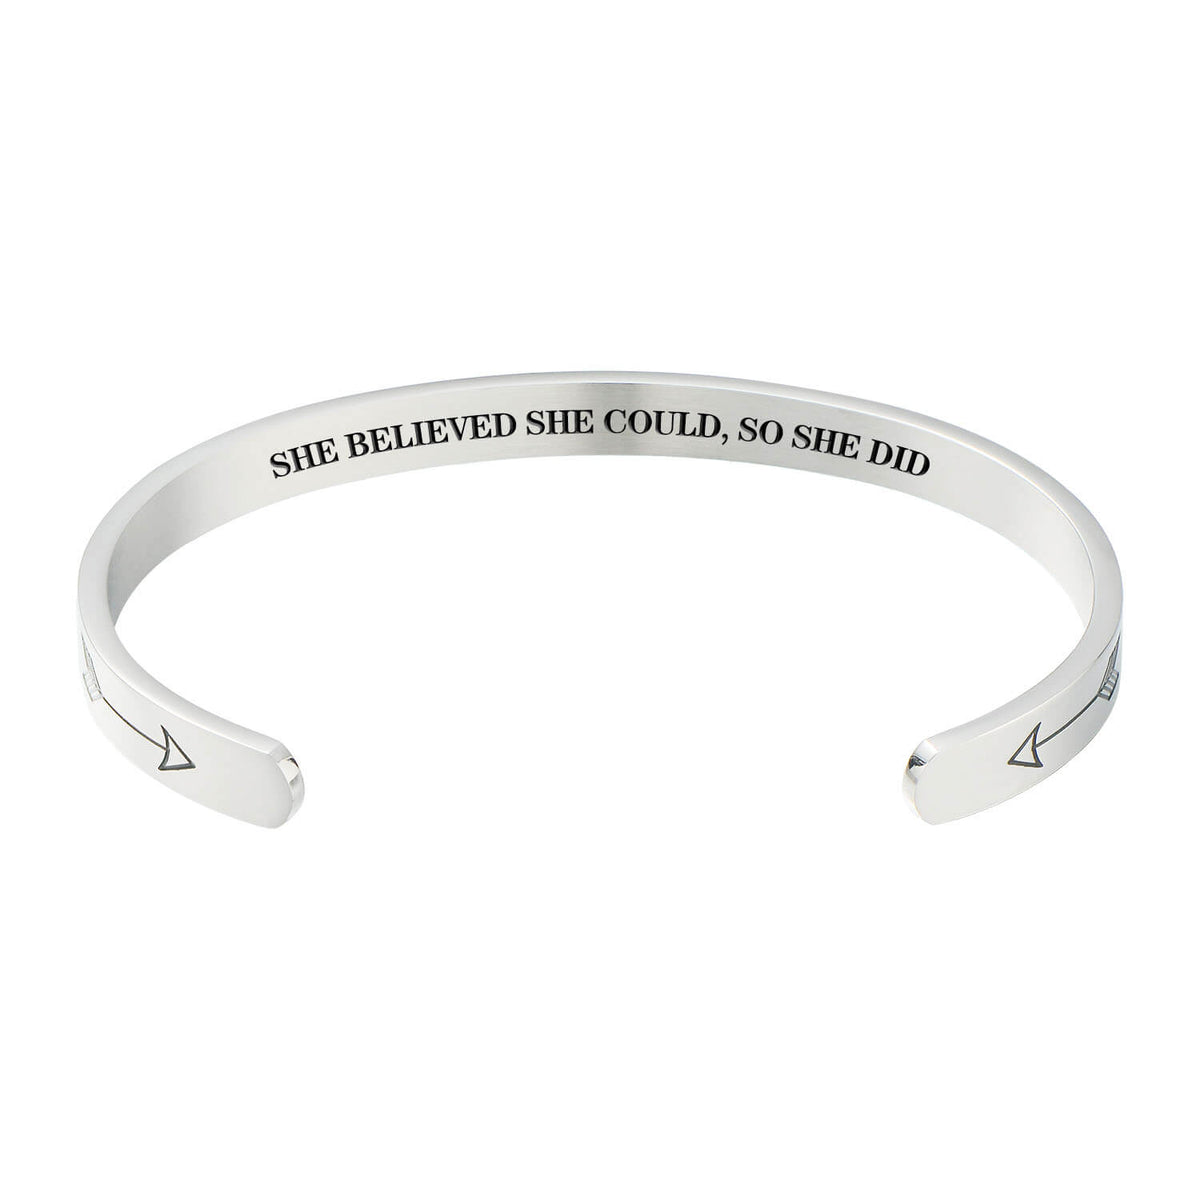 She Believed She Could So She Did Adjustable Cuff Bracelet